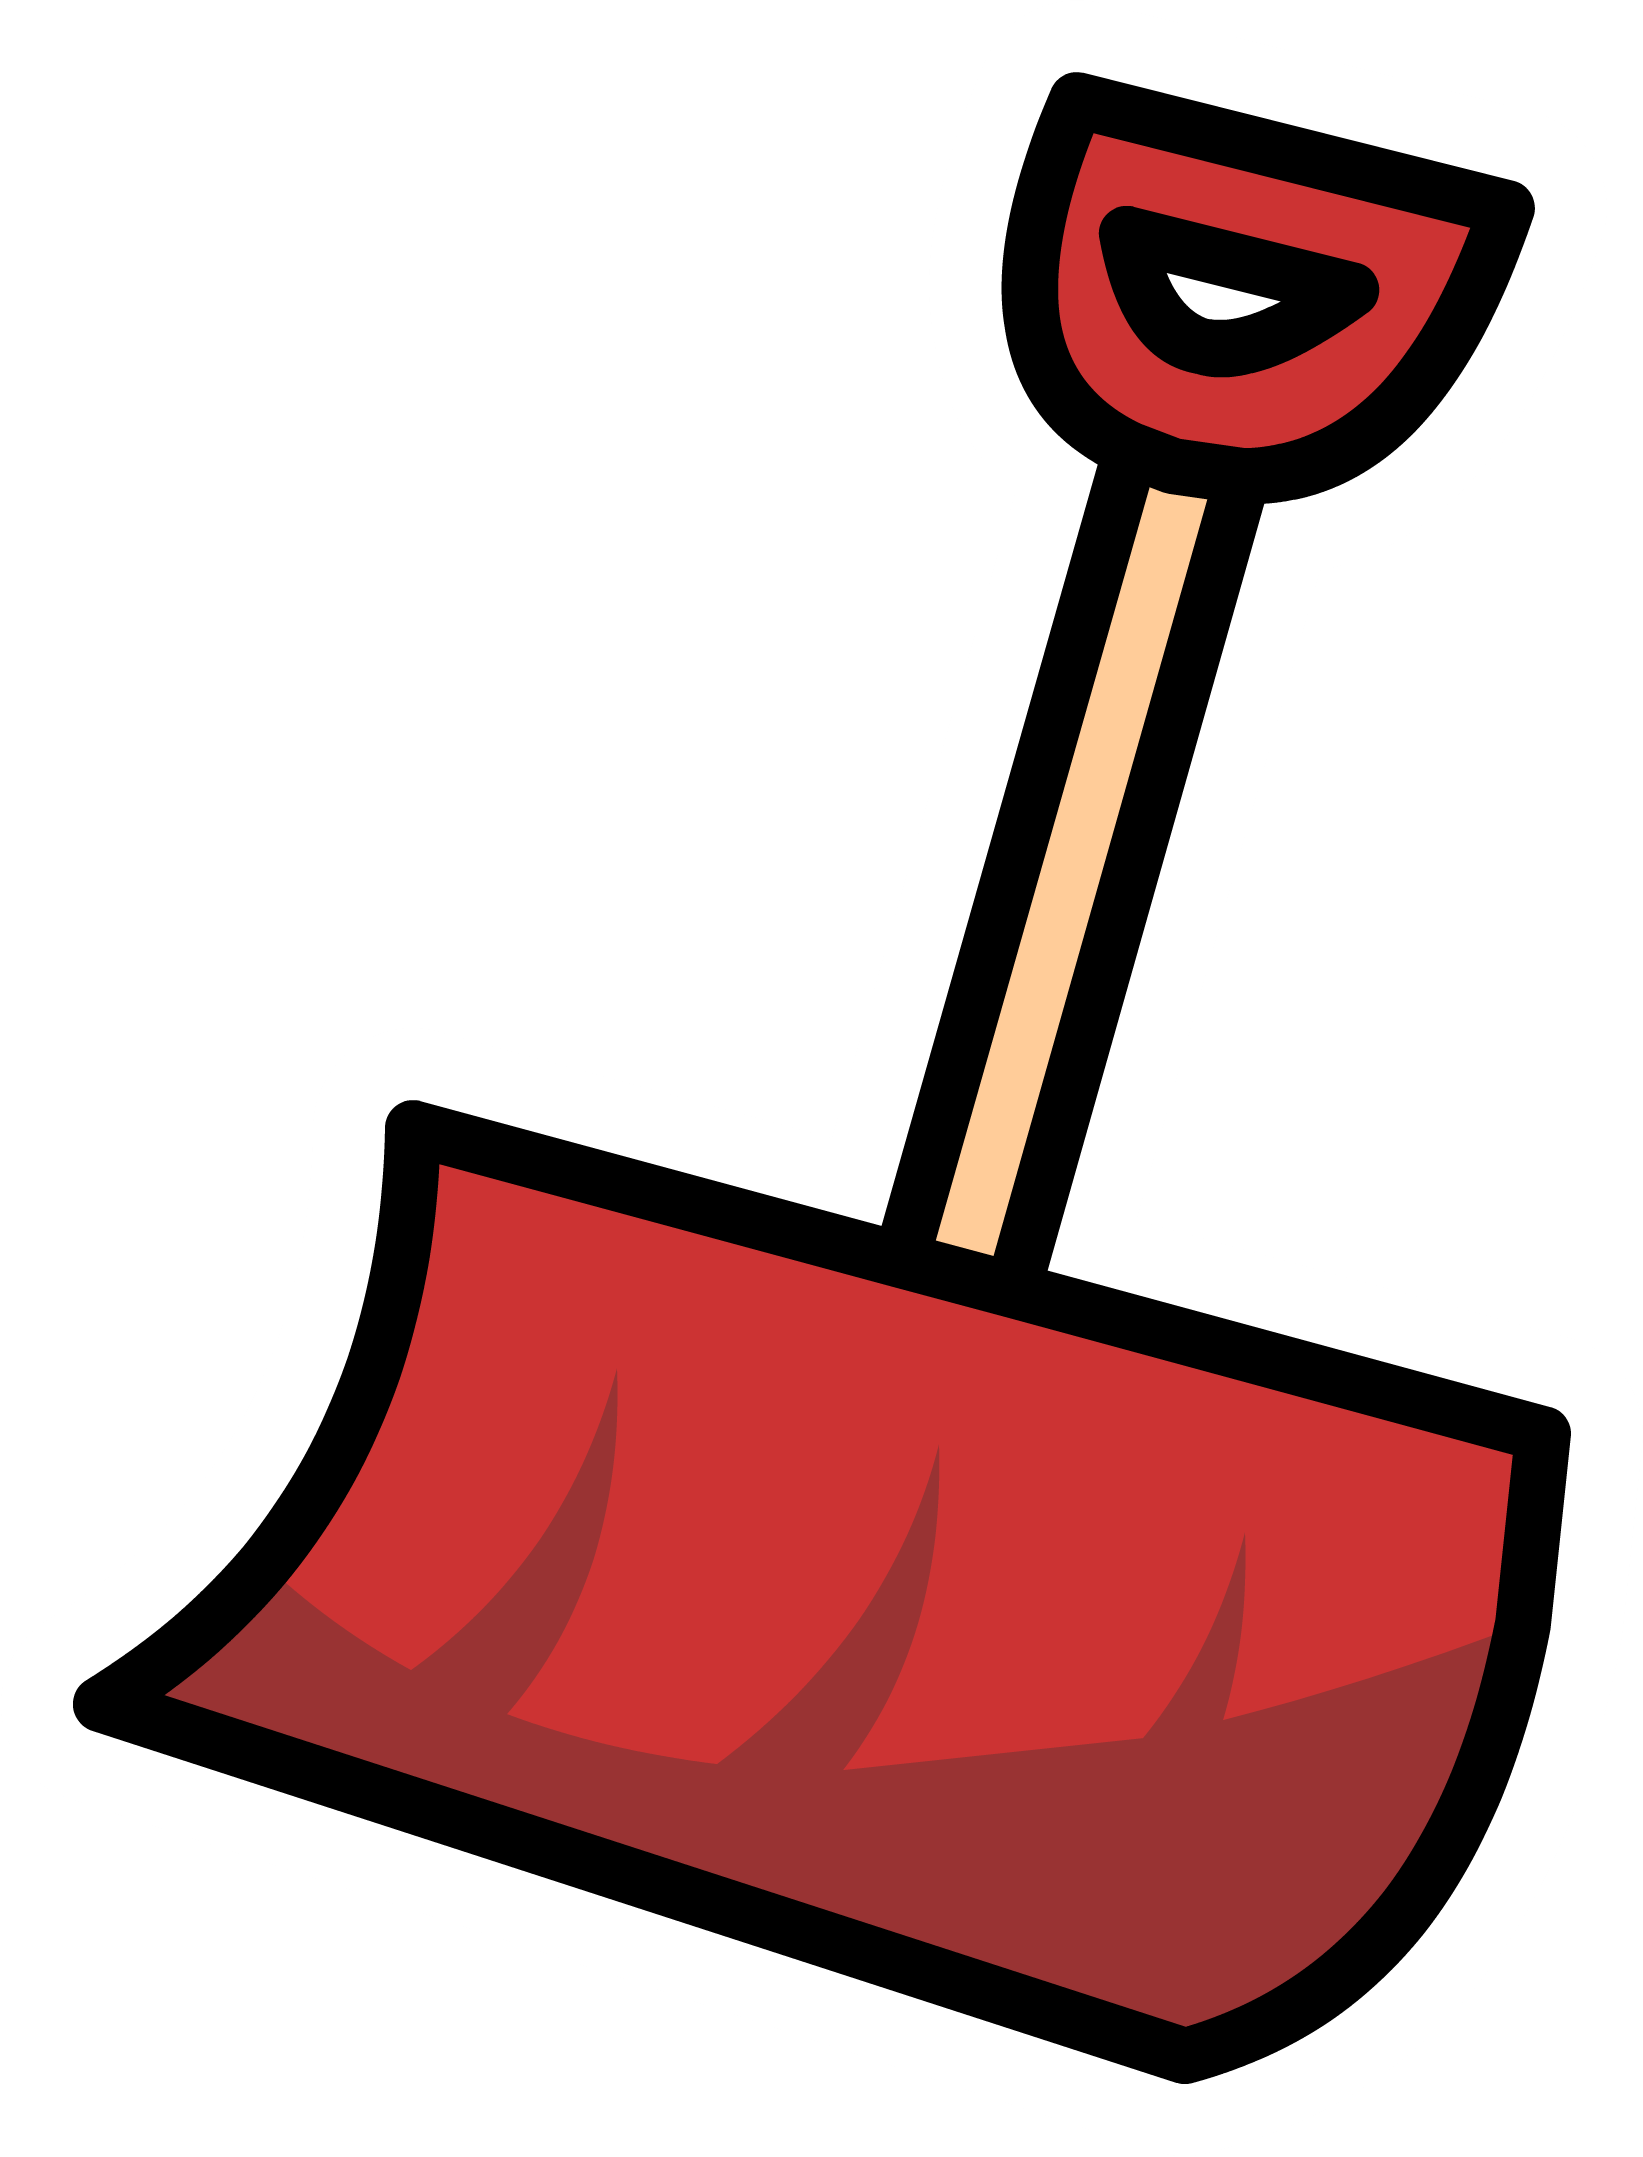 Image red snow shovel. Club clipart spade